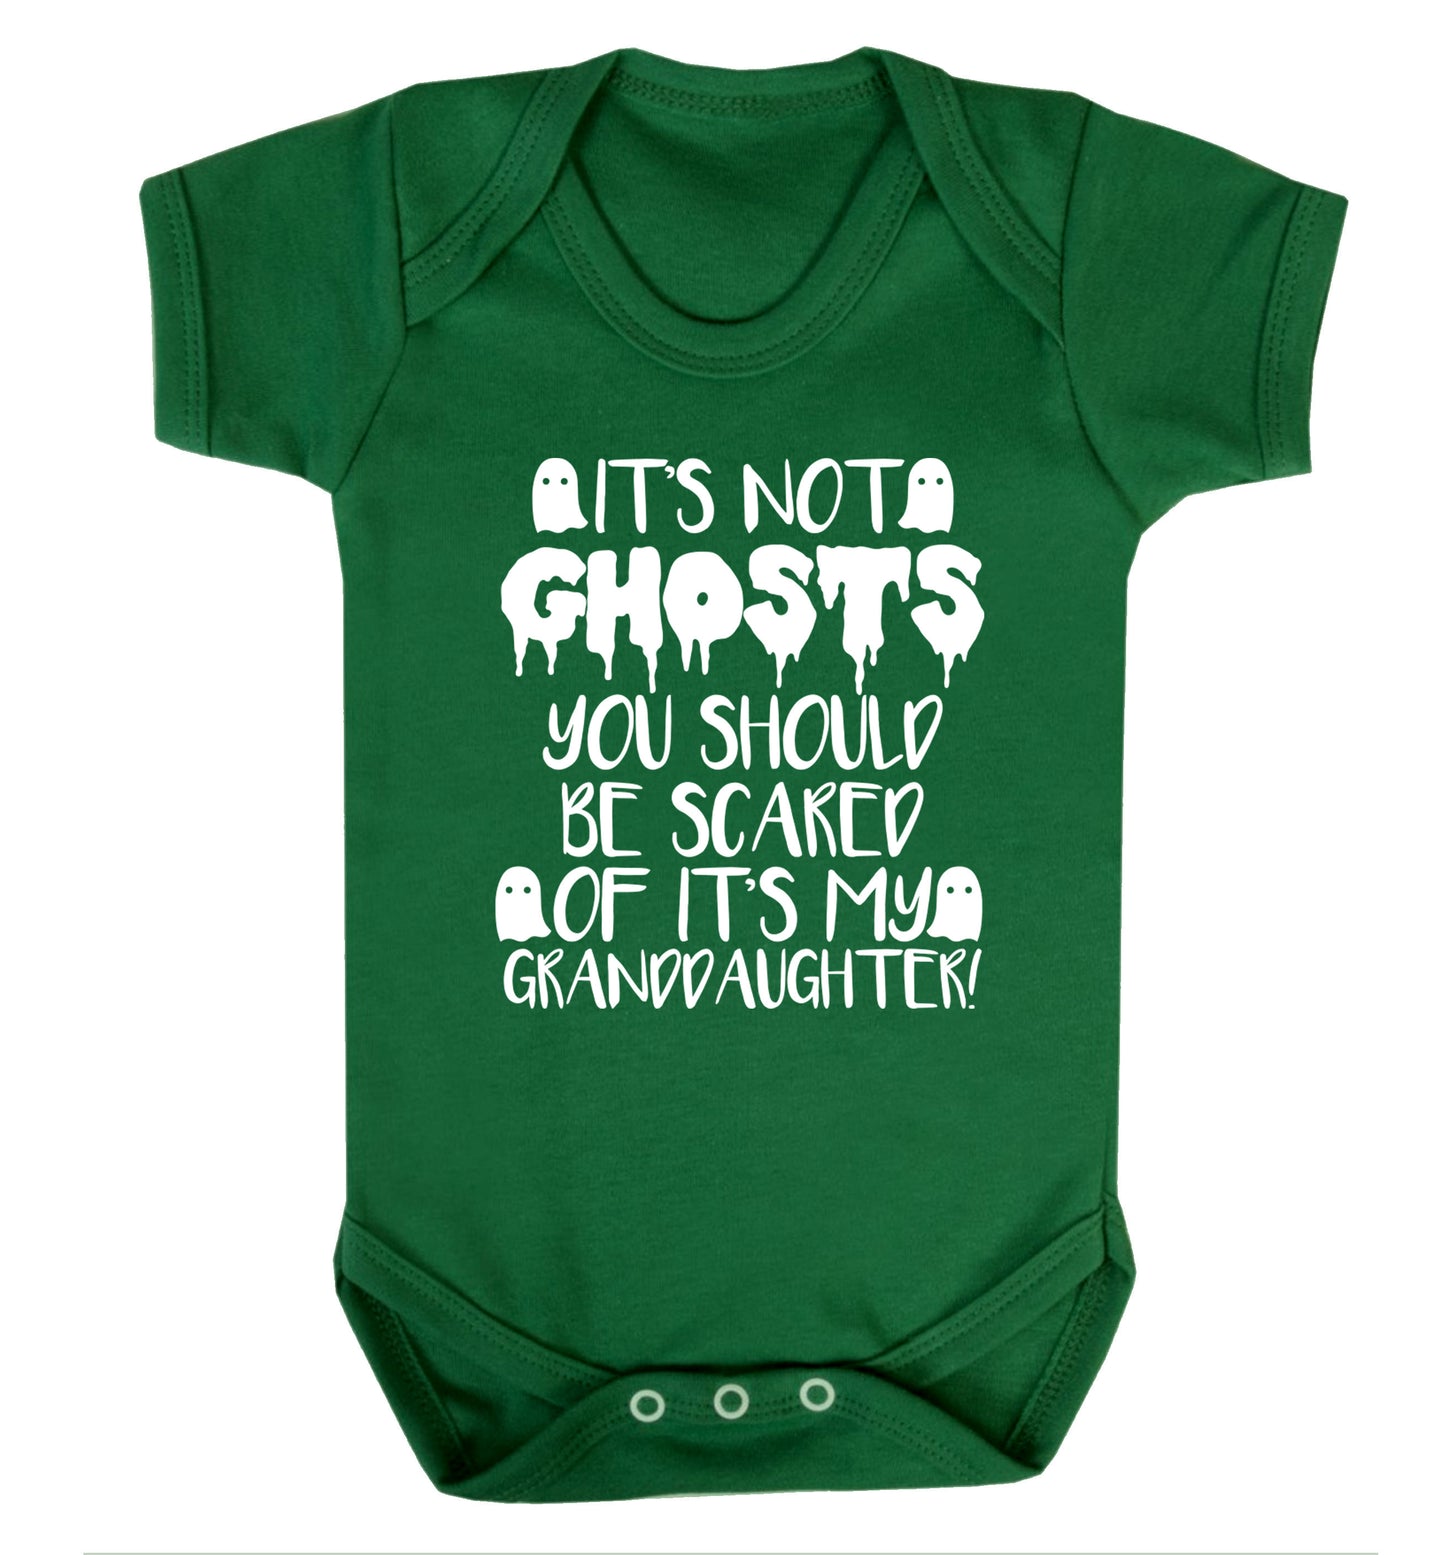 It's not ghosts you should be scared of it's my granddaughter! Baby Vest green 18-24 months